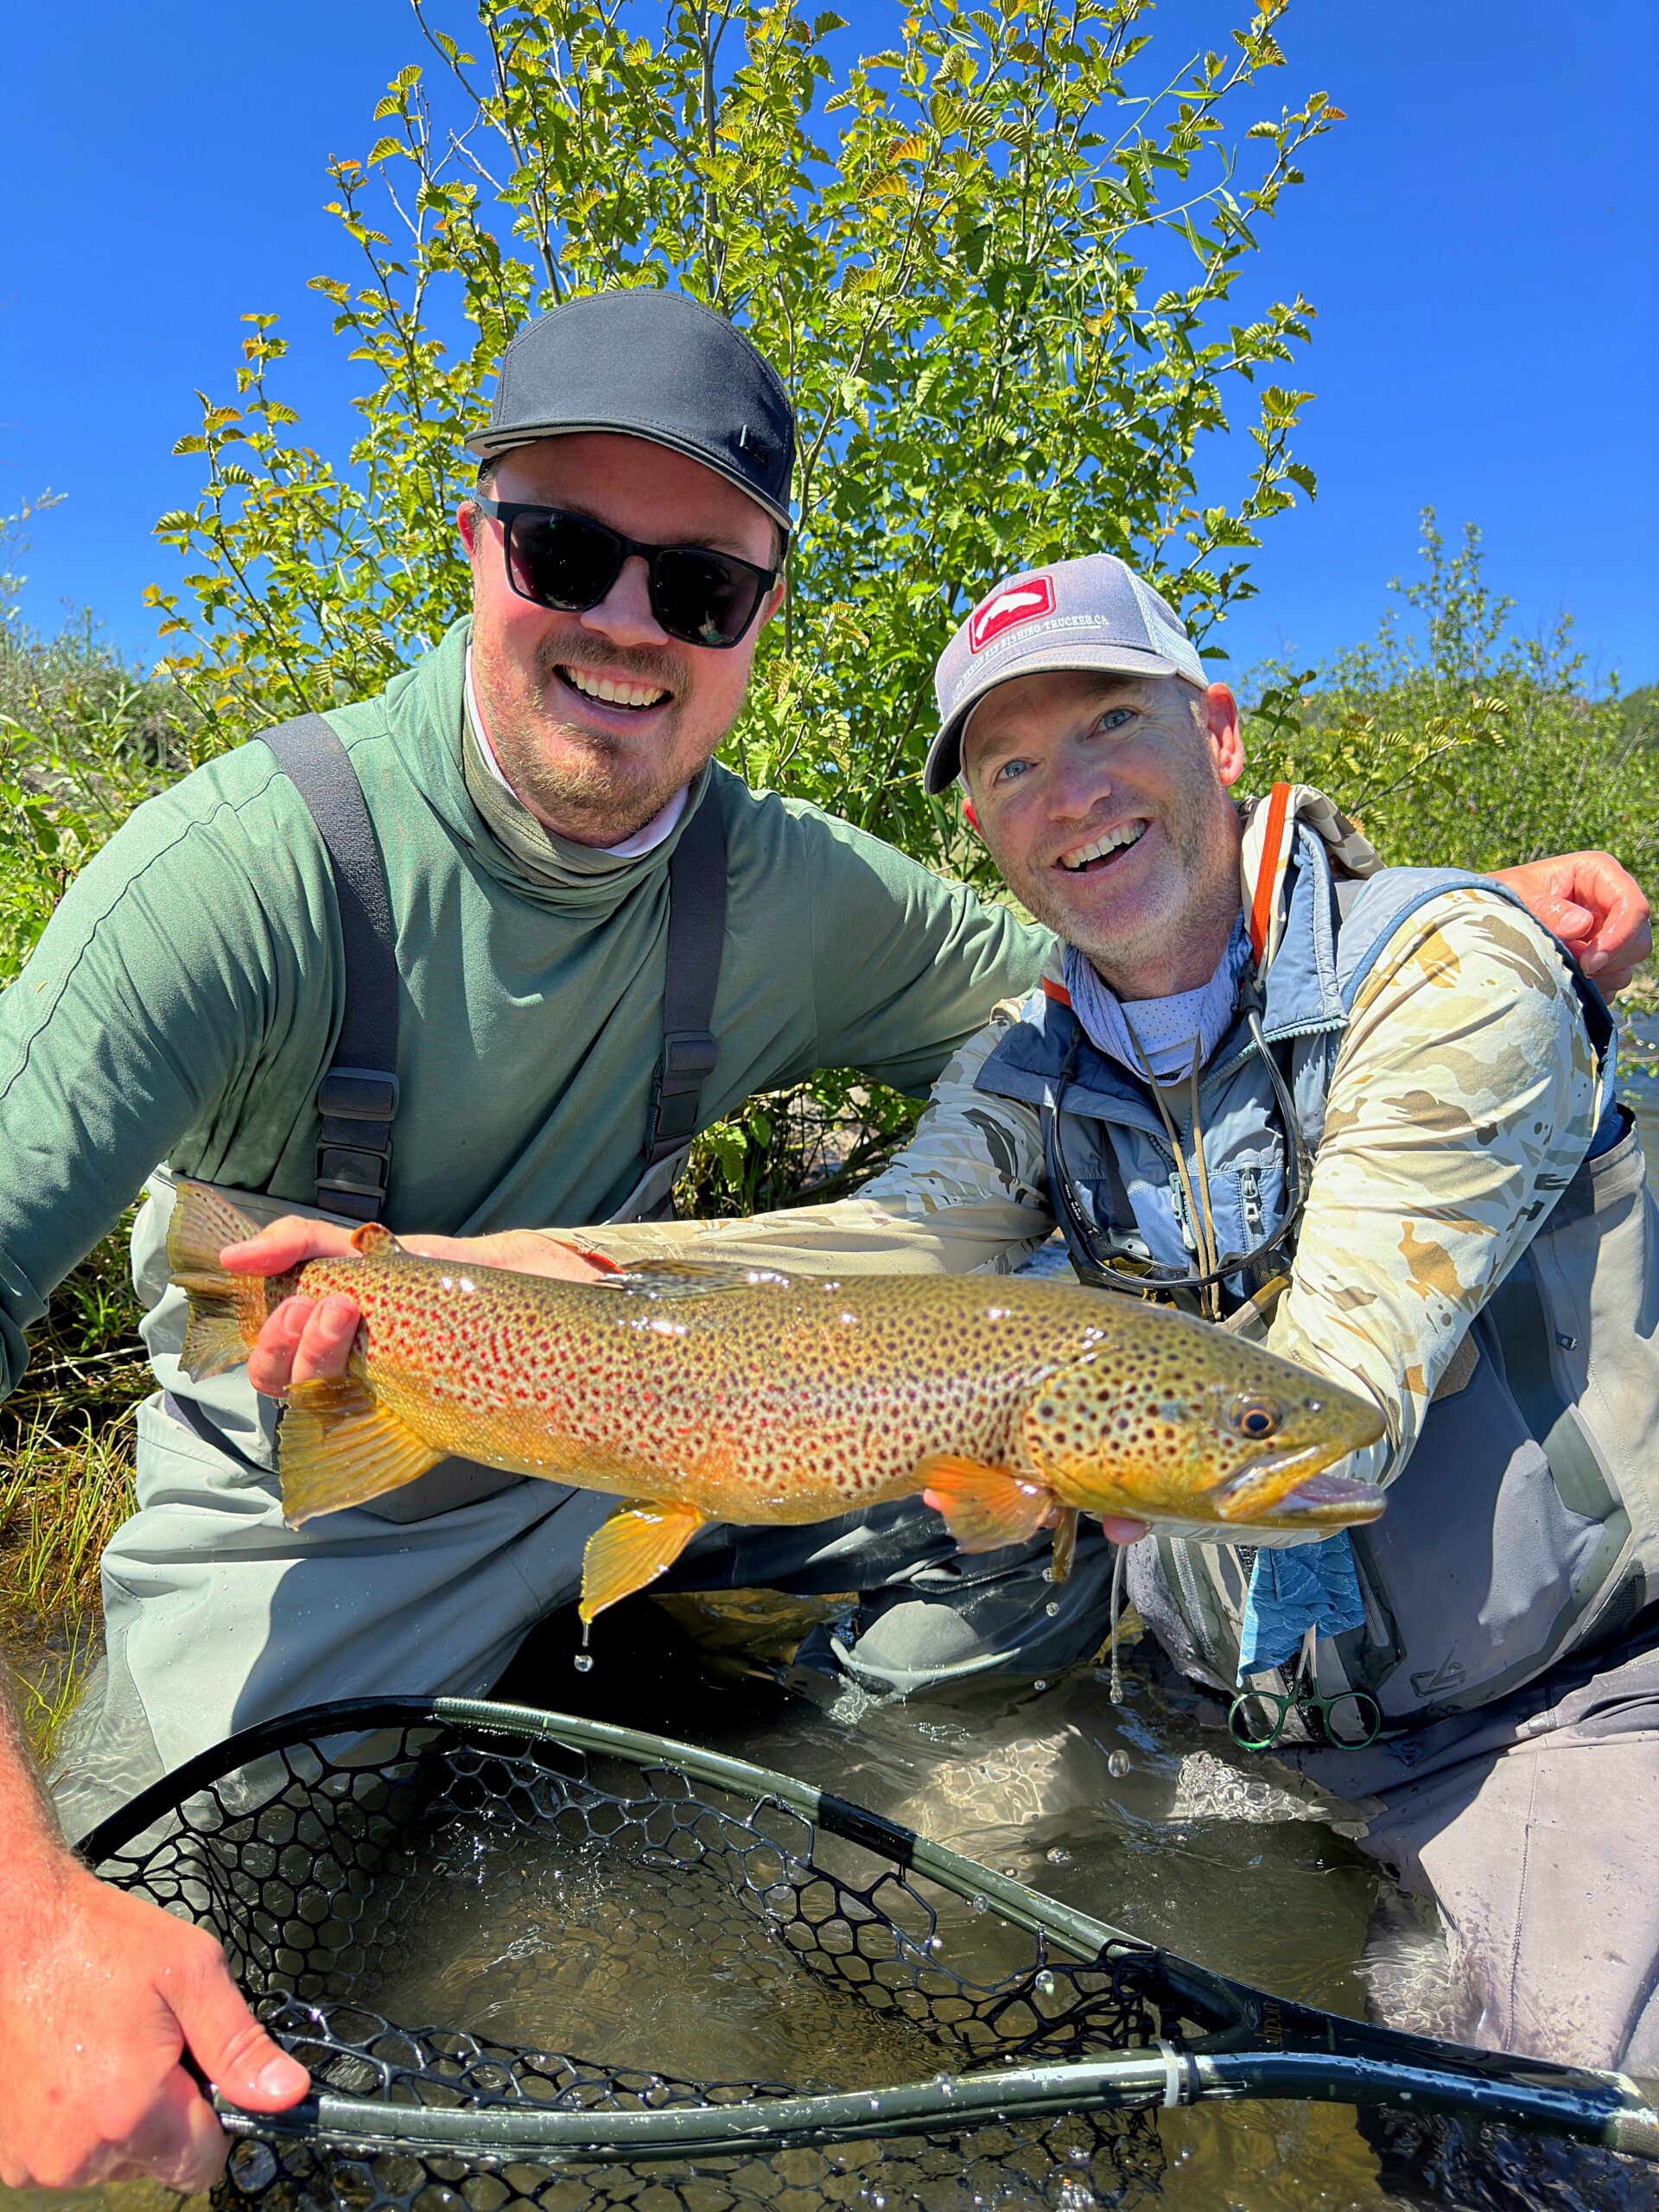 Truckee River Fly Fishing Report: Quick Vid. June 7th